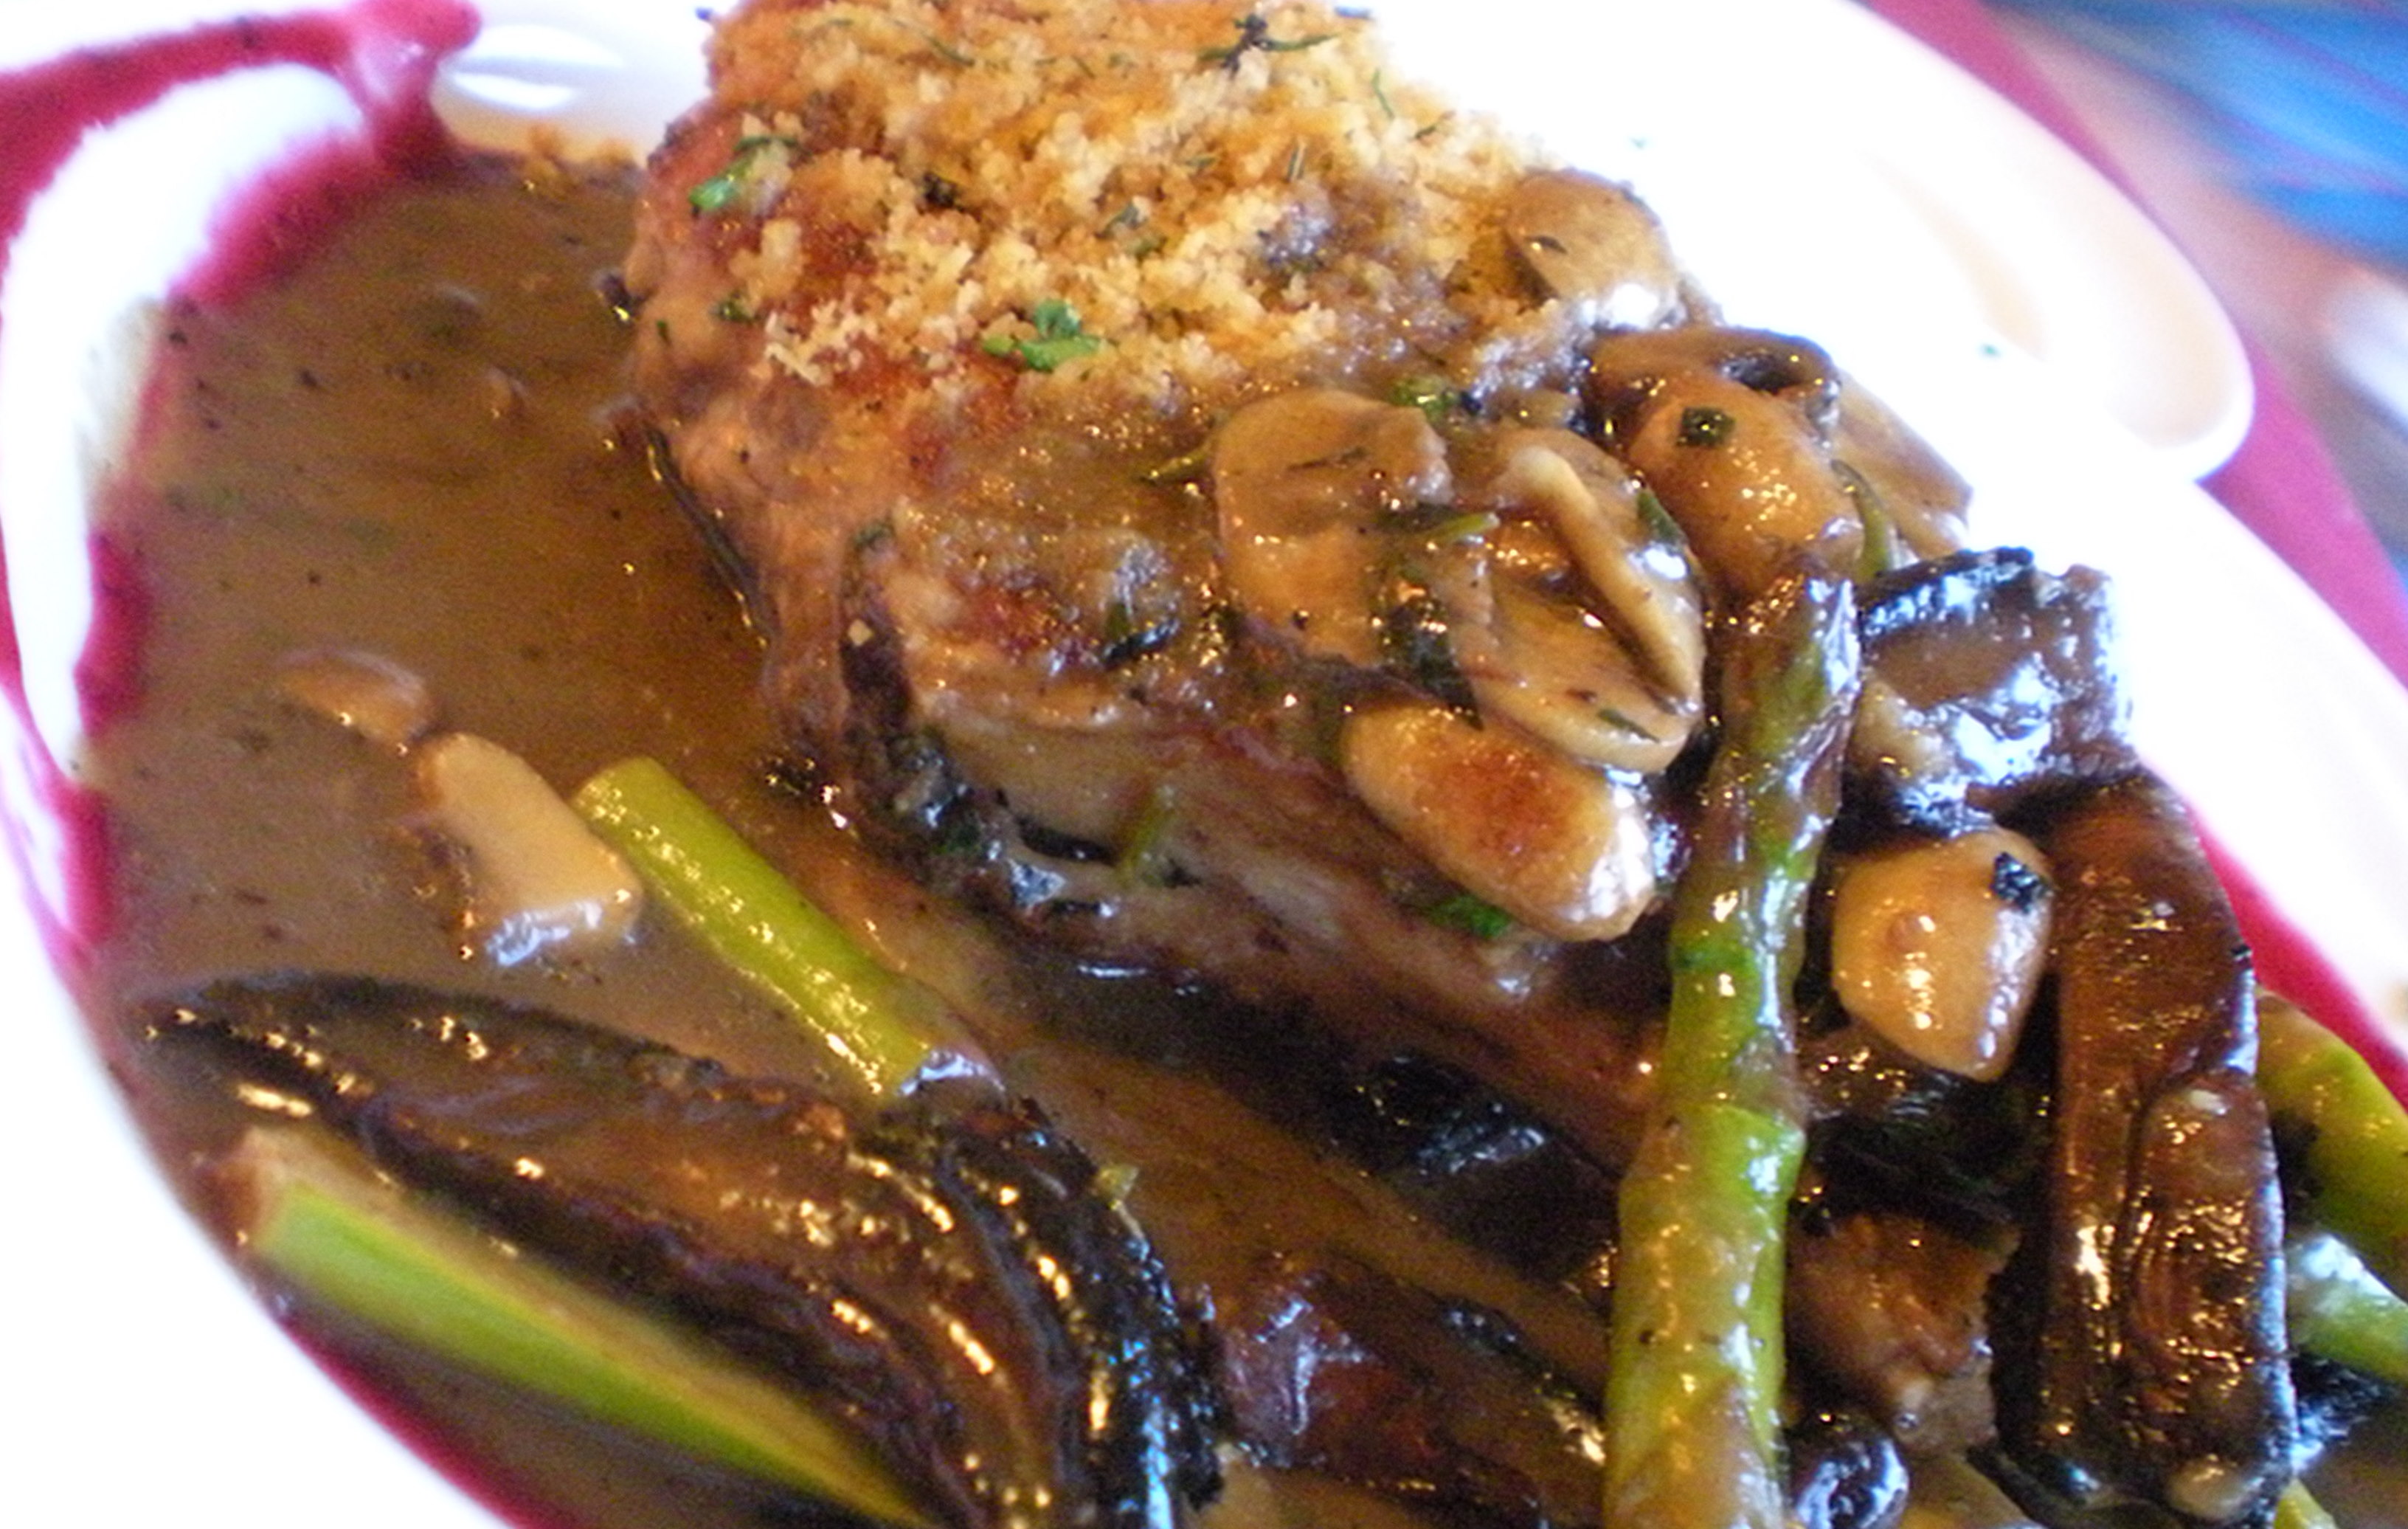 My father had this succulant looking pork chop in gravy with mushrooms